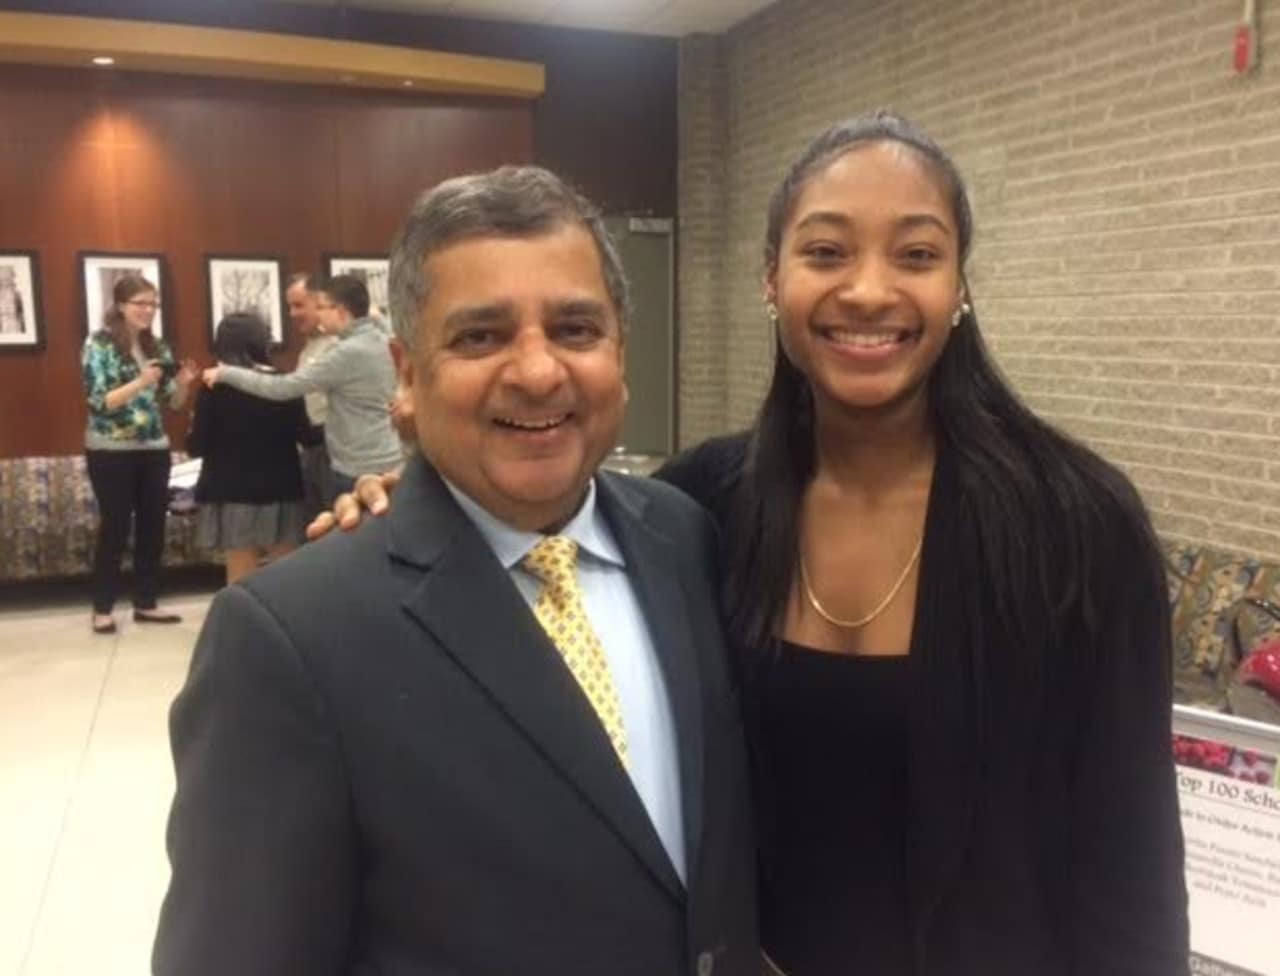 Alanna McCatty with Uday Sukhatme, Pace's provost and Executive Vice President for Academic Affairs.